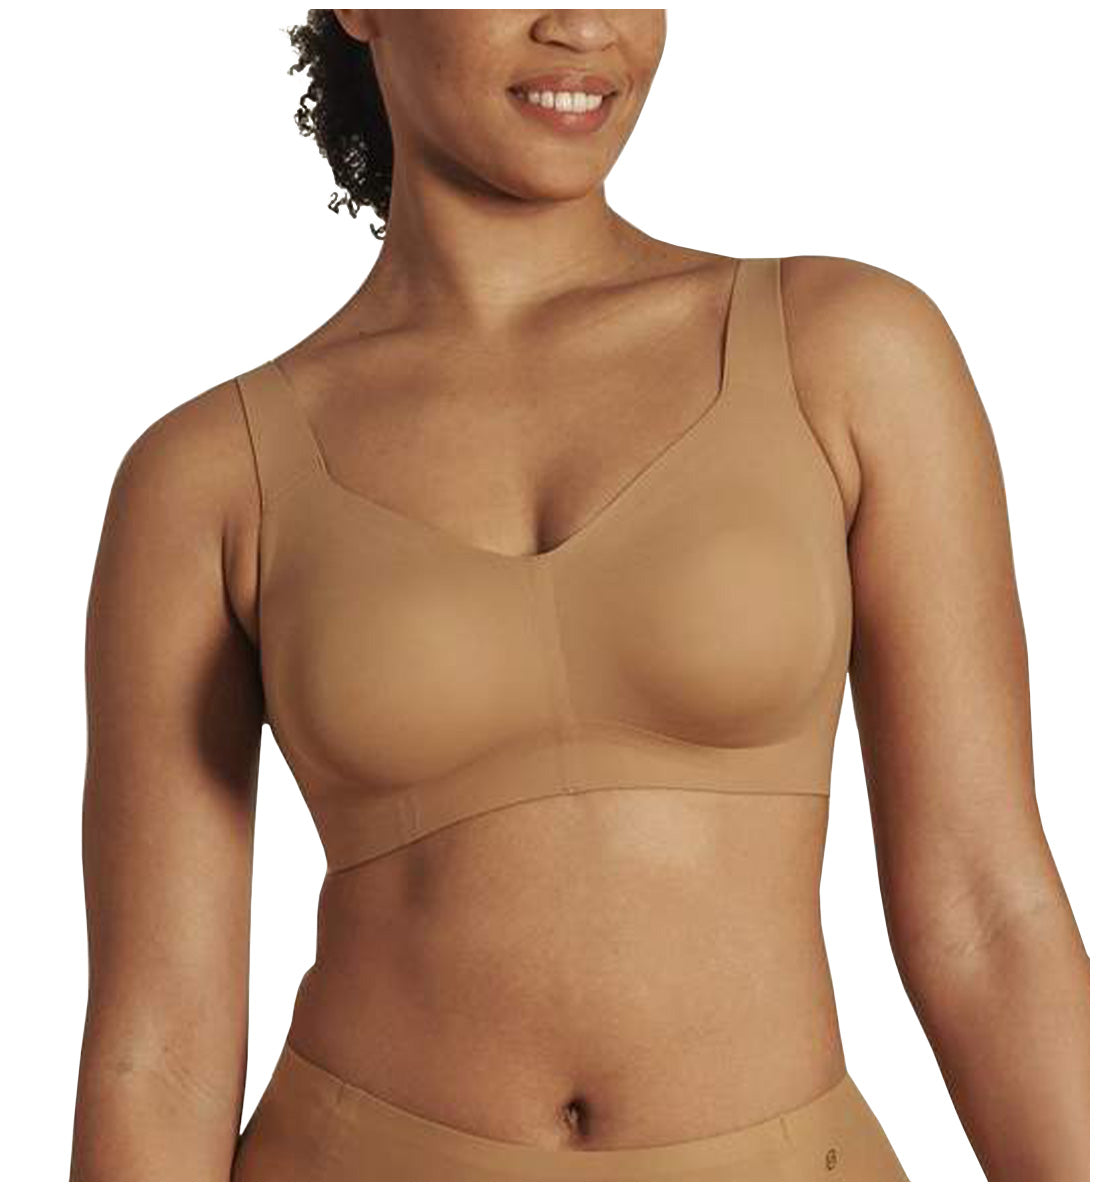 Evelyn & Bobbie BEYOND Adjustable Bra (1732),Small,Mica - Mica,Small